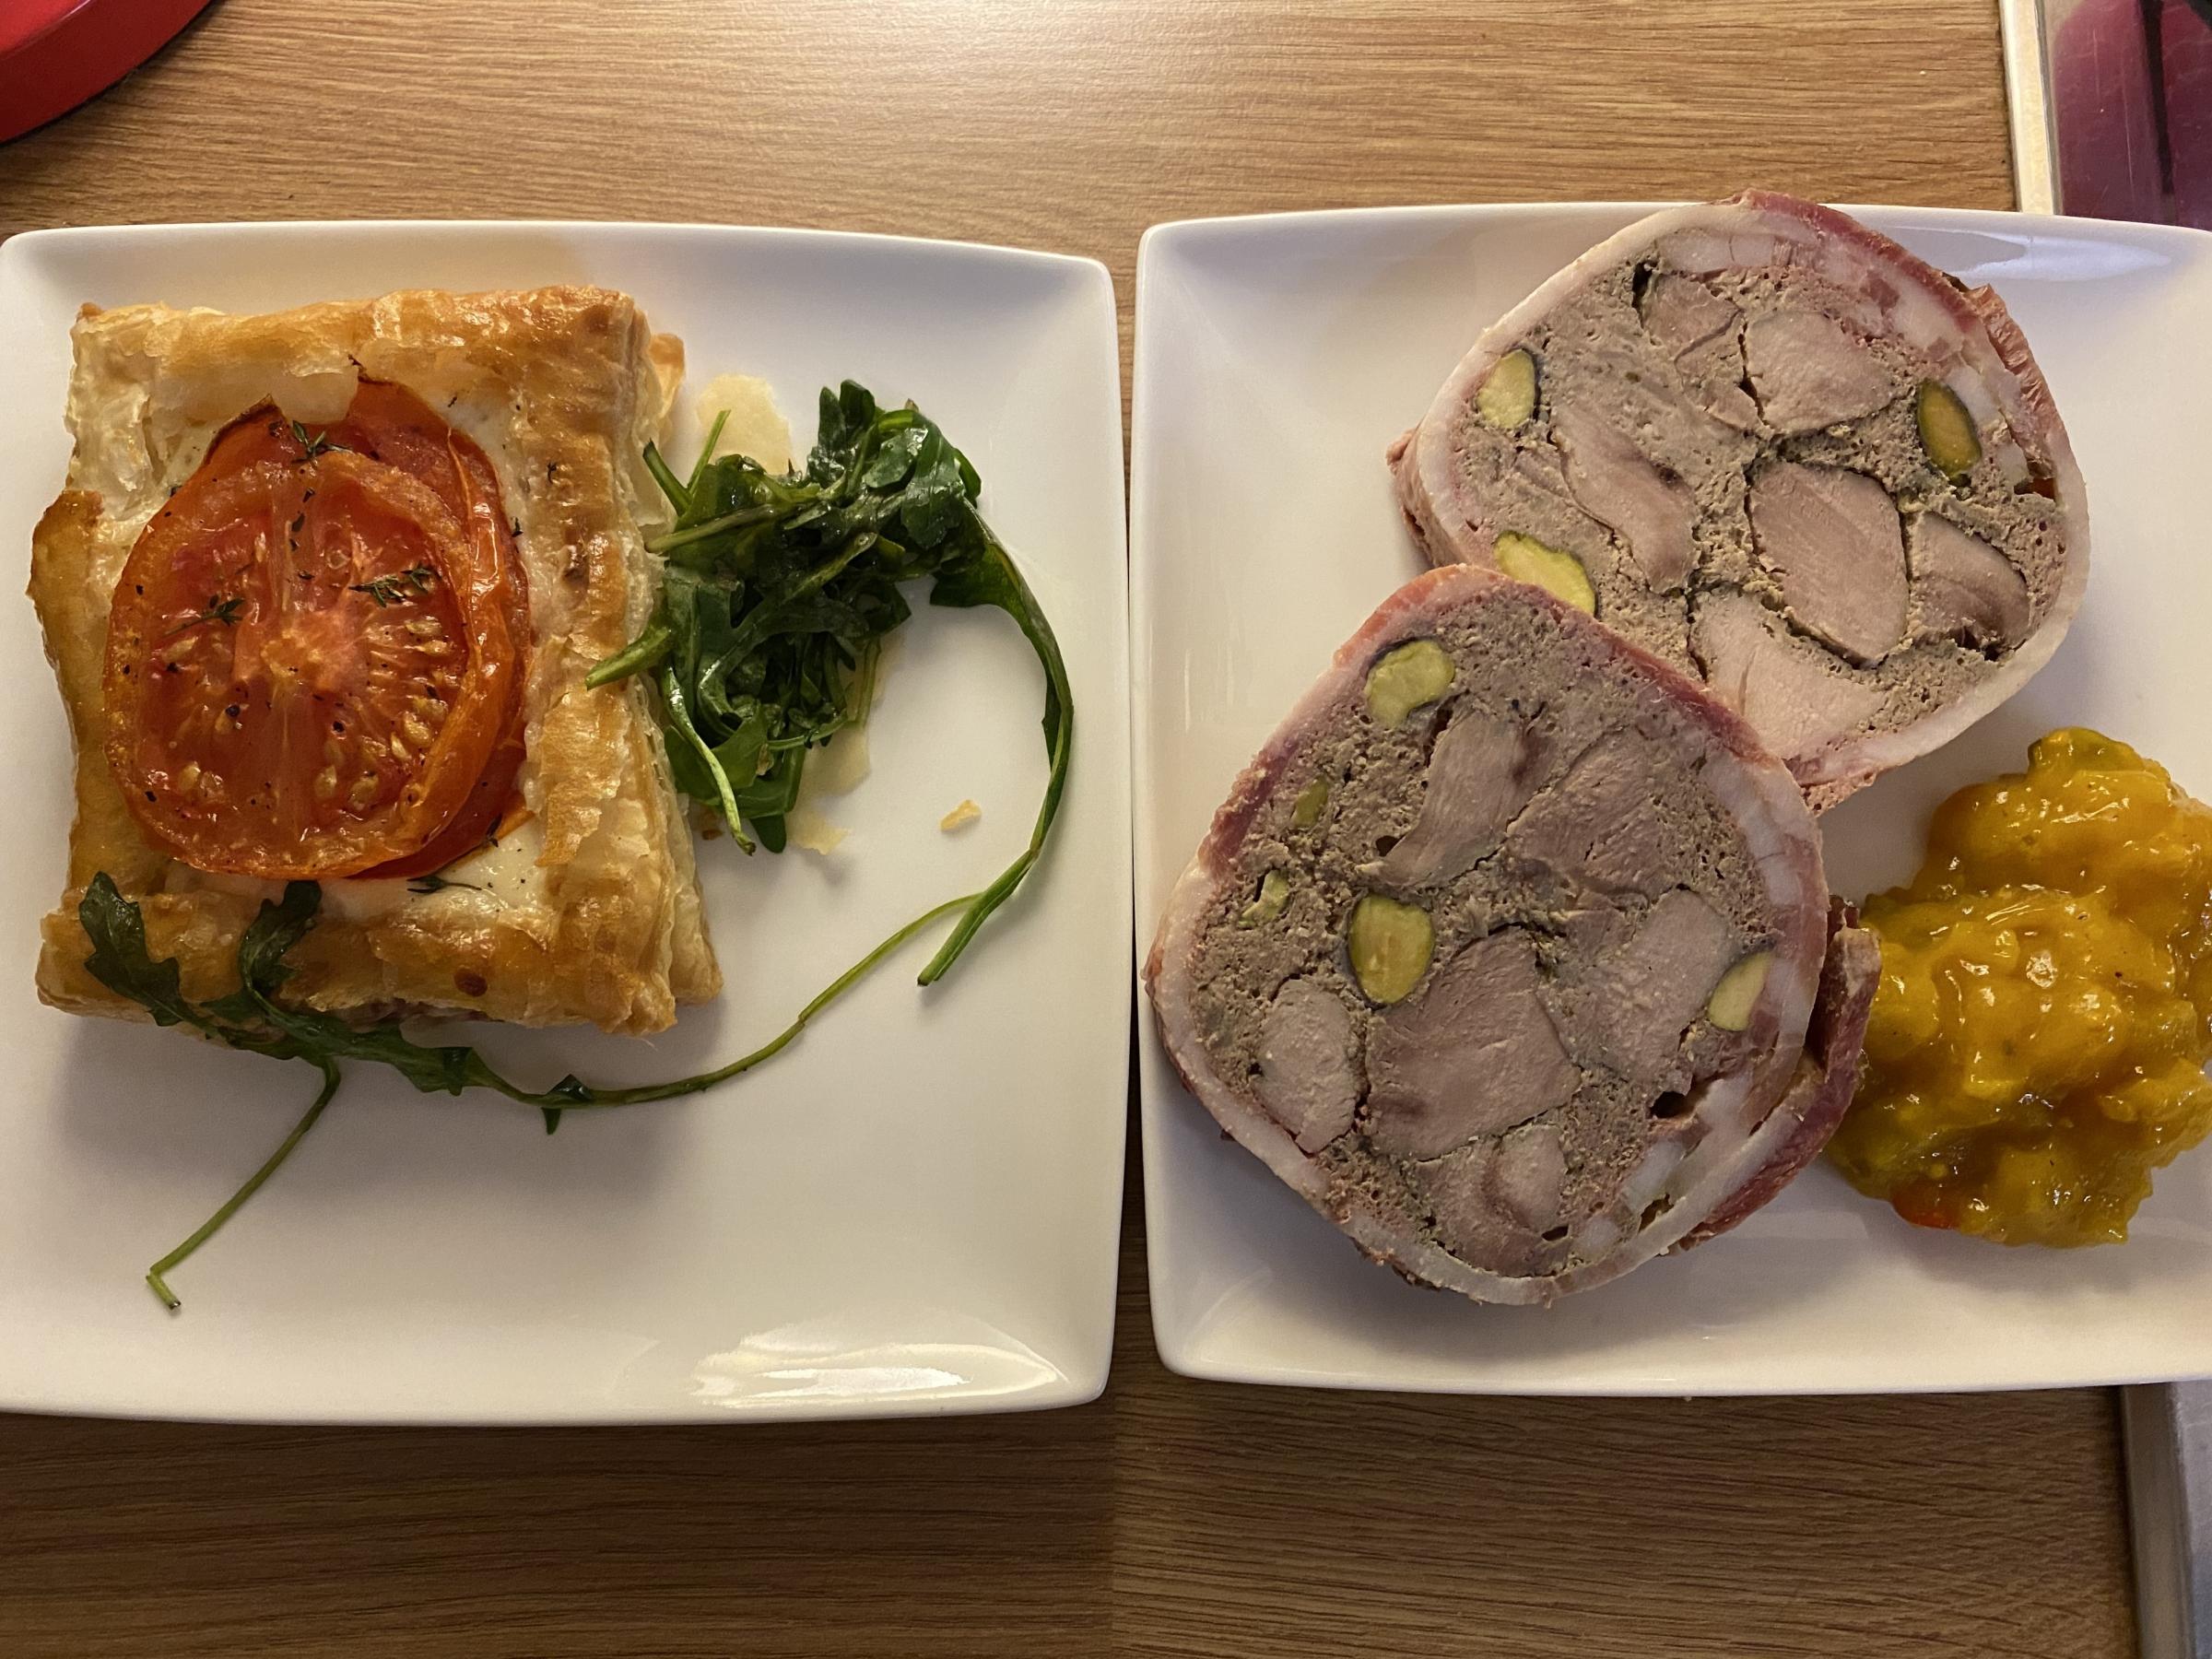 Our starters - a small tomato tart and the pheasant and pistachio terrine 